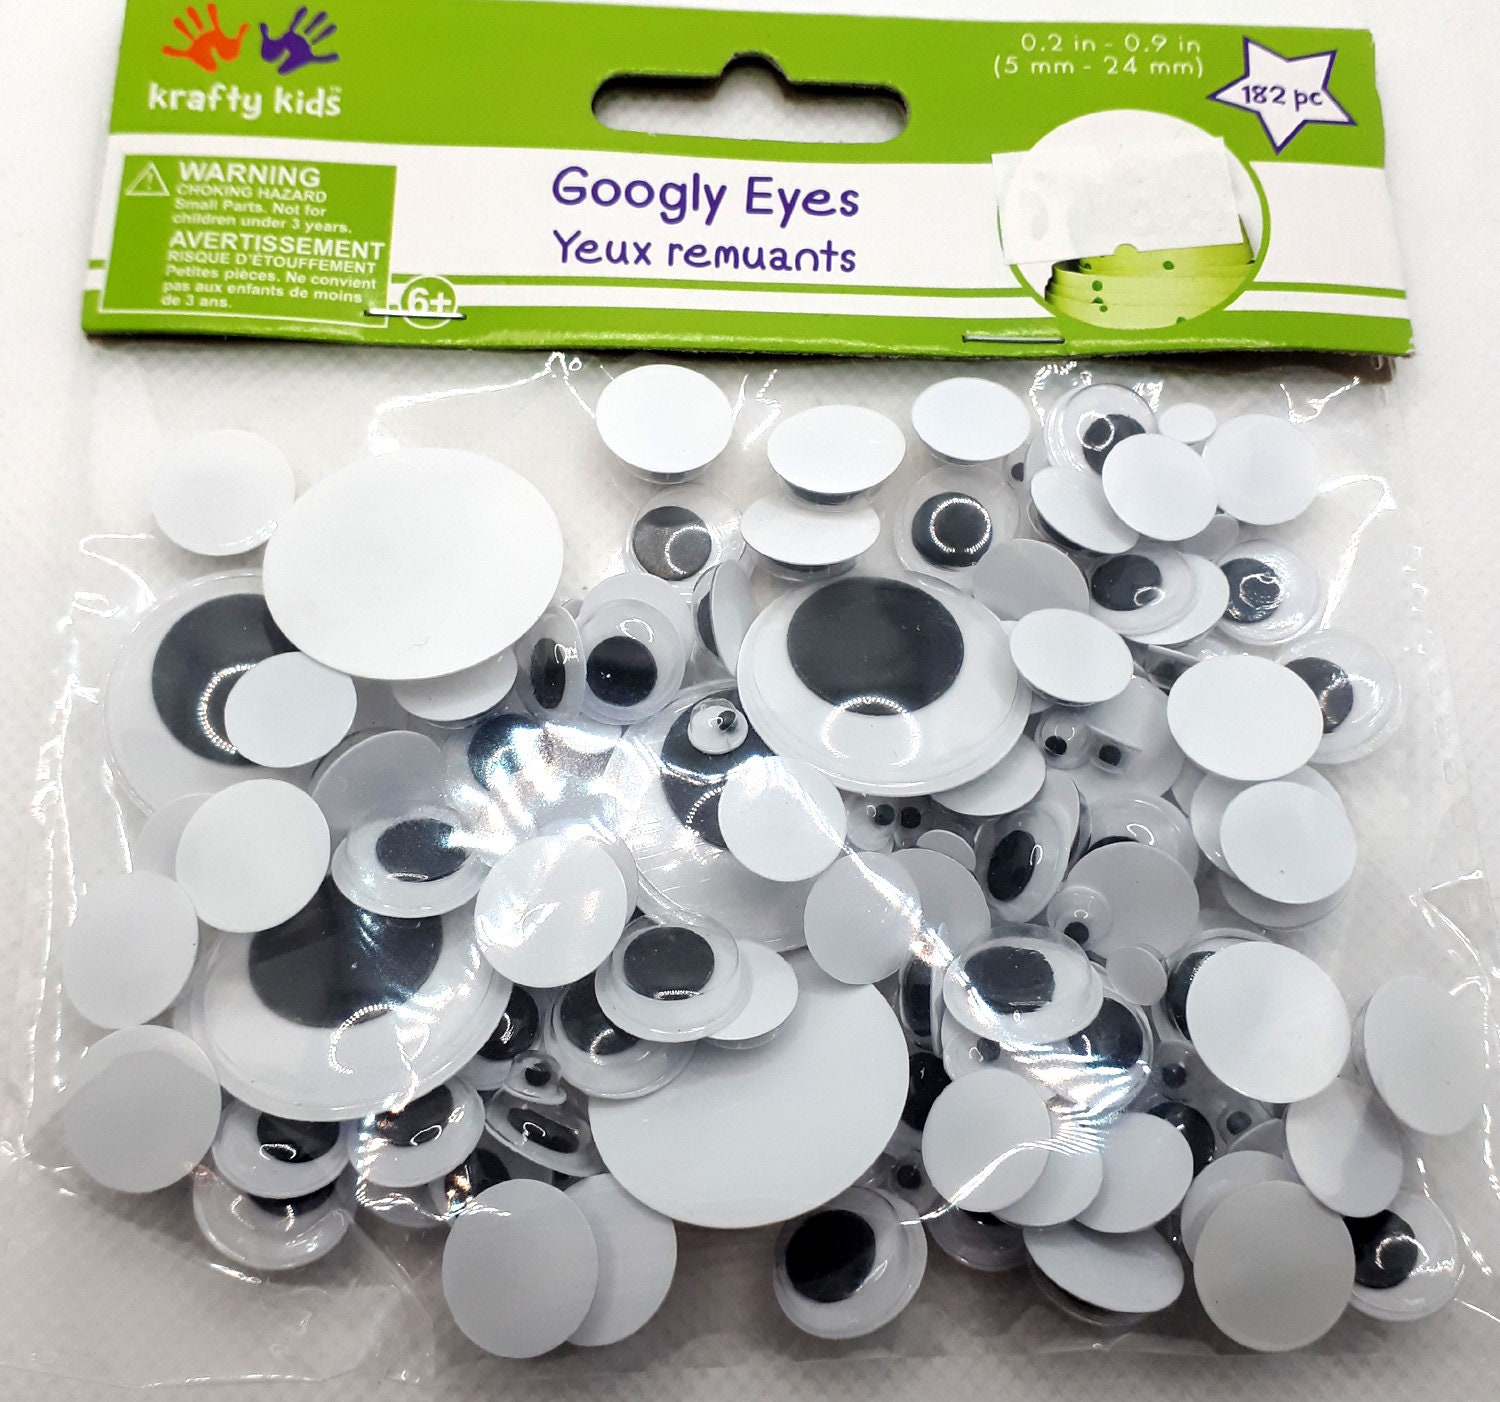 Incraftables Googly Eyes 1680 Pcs (Self Adhesive) Set. Best Small, Large Colorful Sticky Wiggle Eye for DIY Arts, Crafts (4 mm to 18 mm). 30